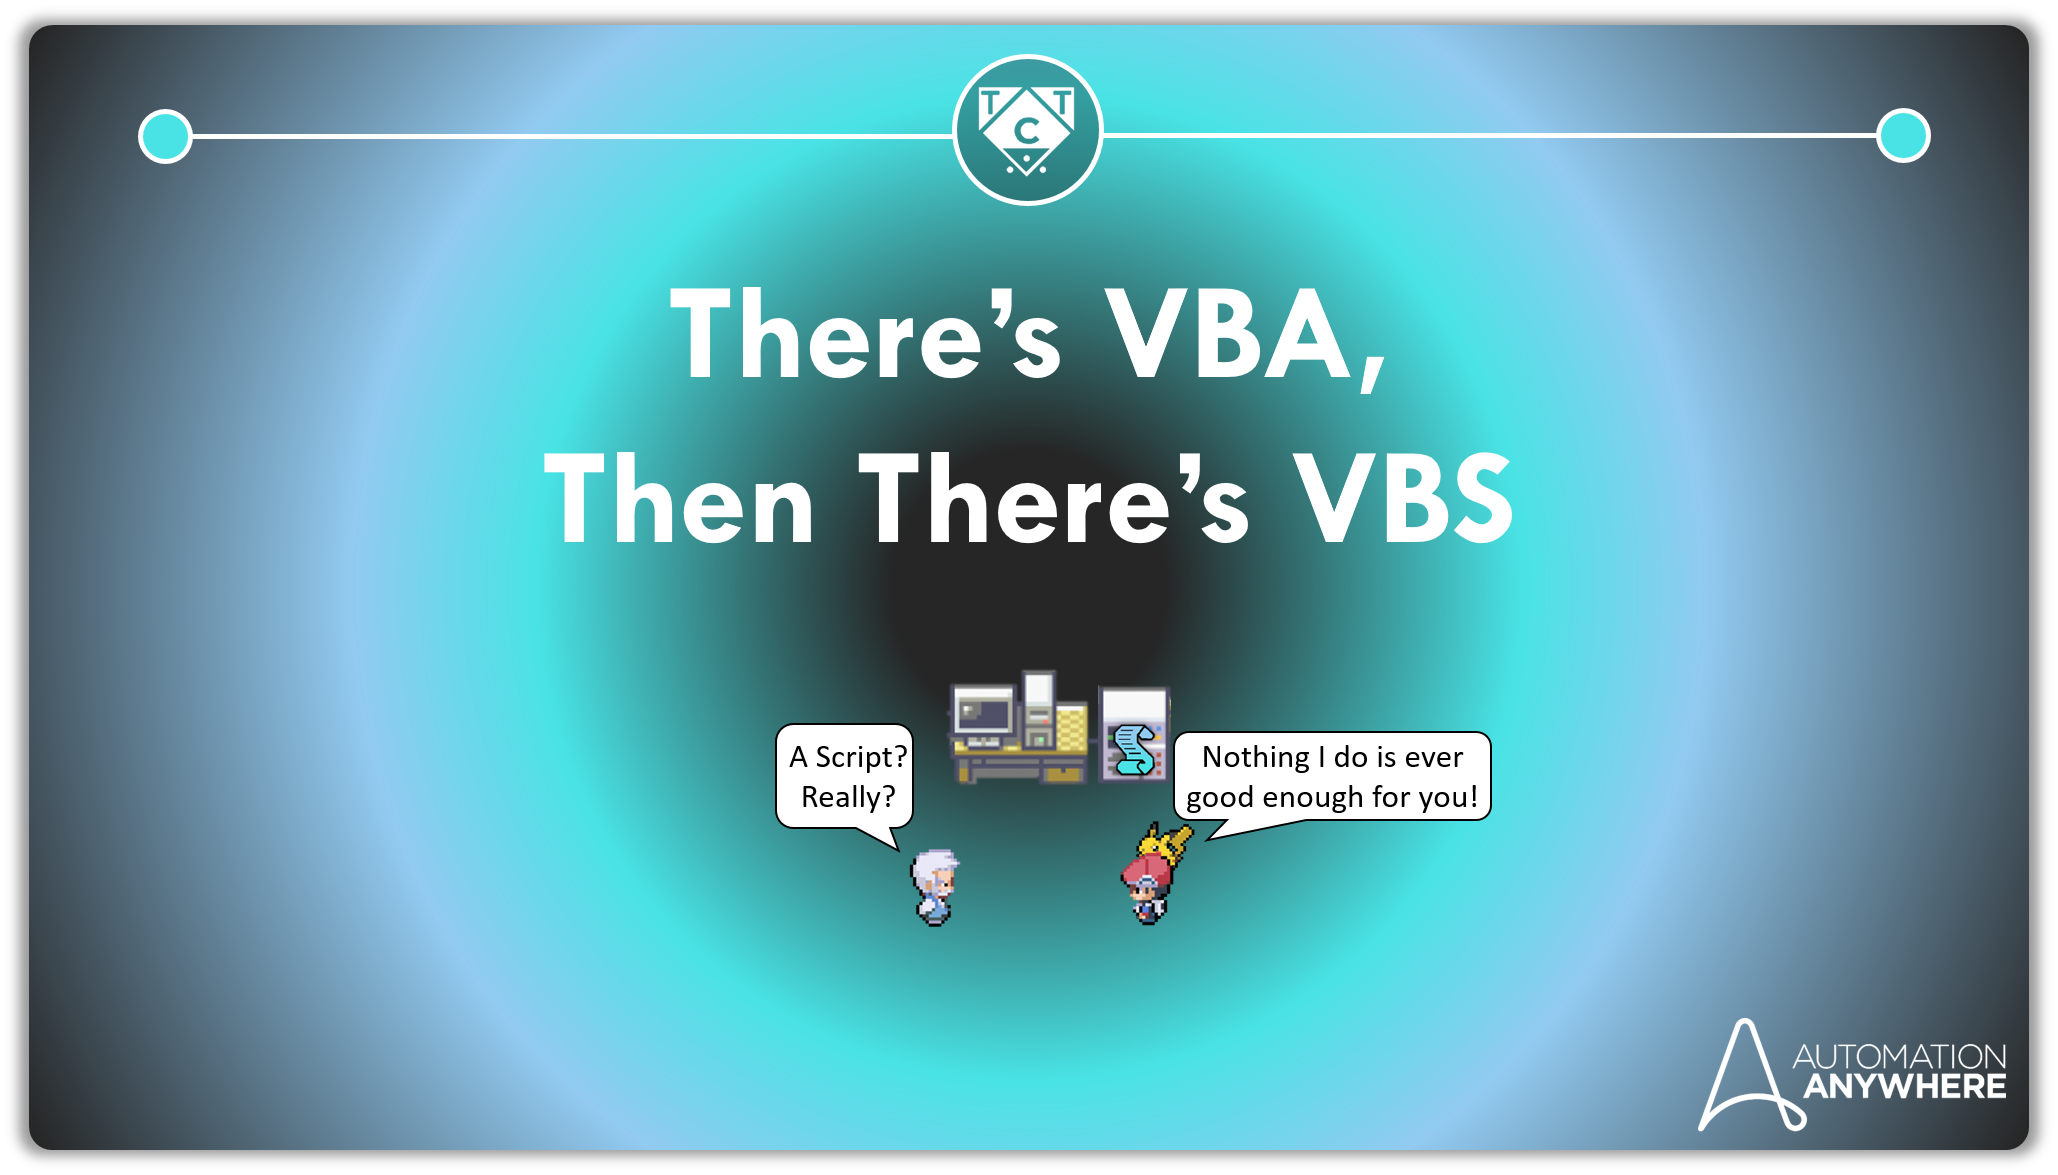 There’s VBA, Then There’s VBS.